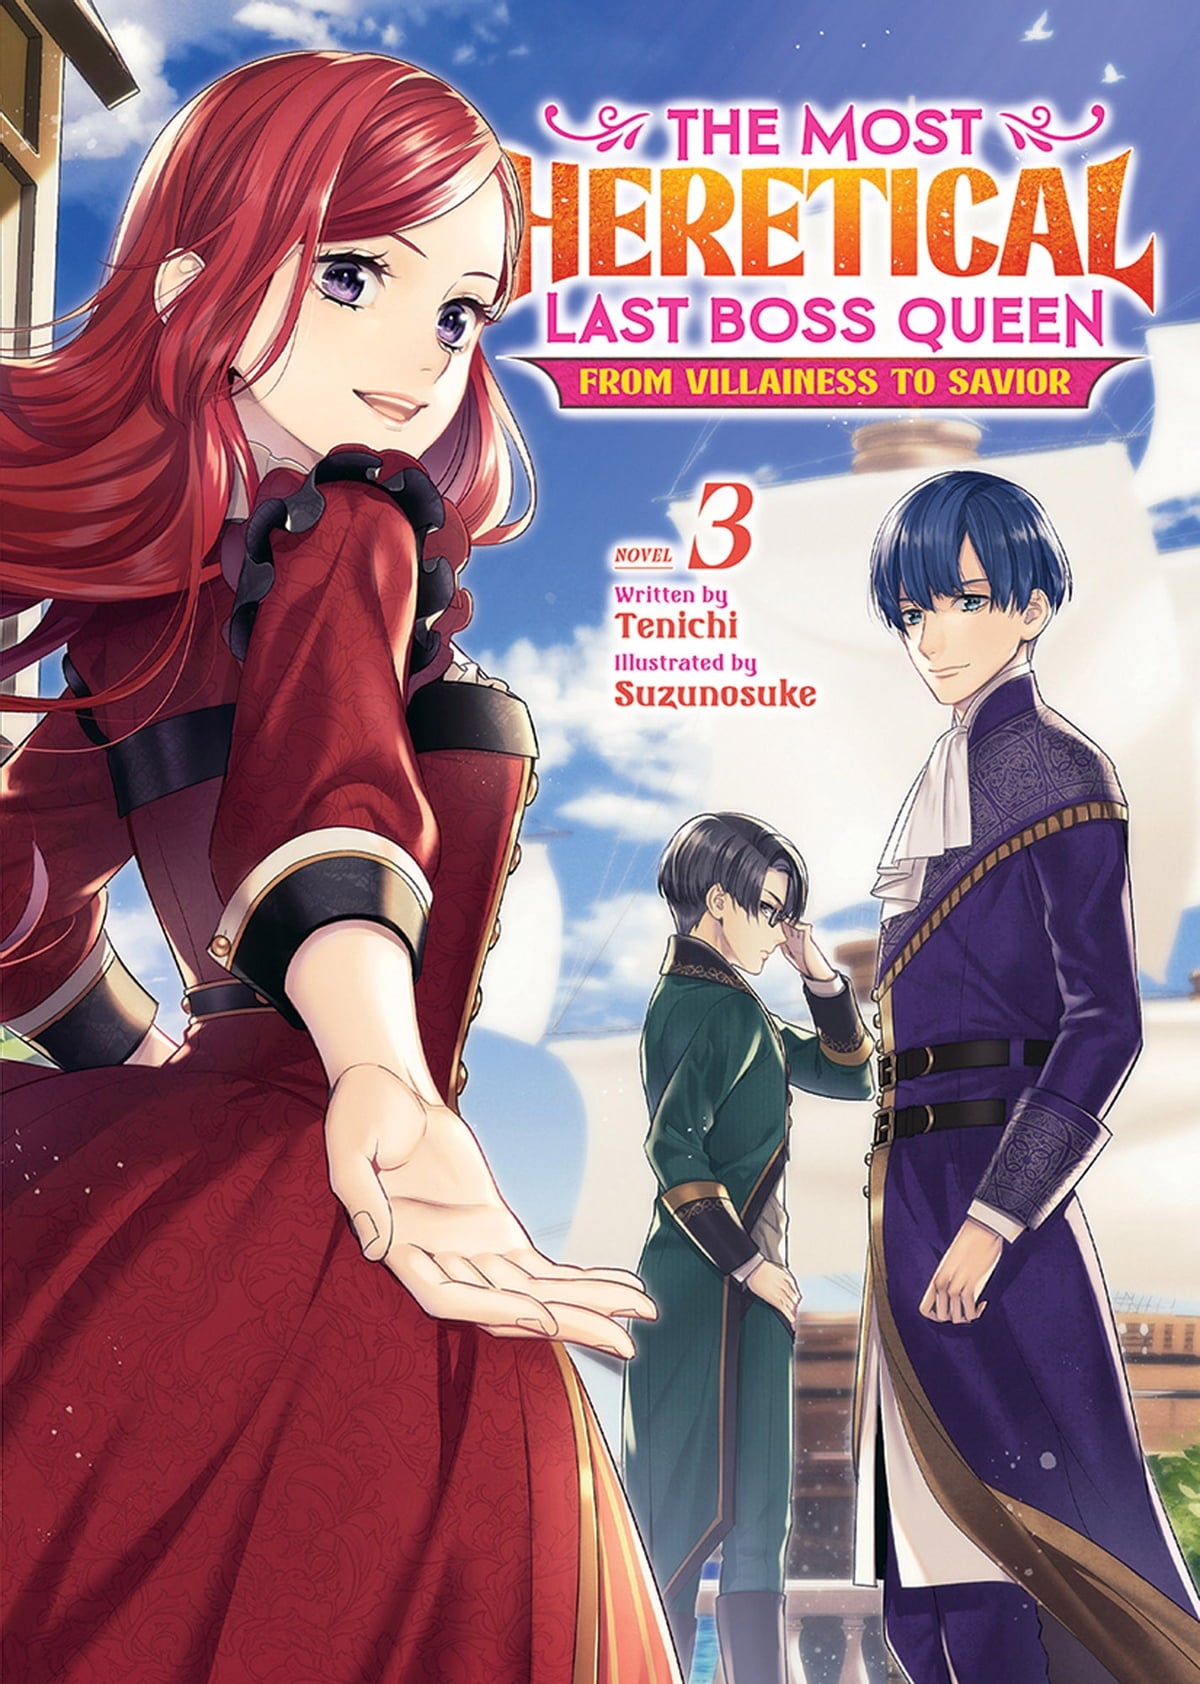 The Most Heretical Last Boss Queen: From Villainess to Savior (Light Novel) Vol. 03